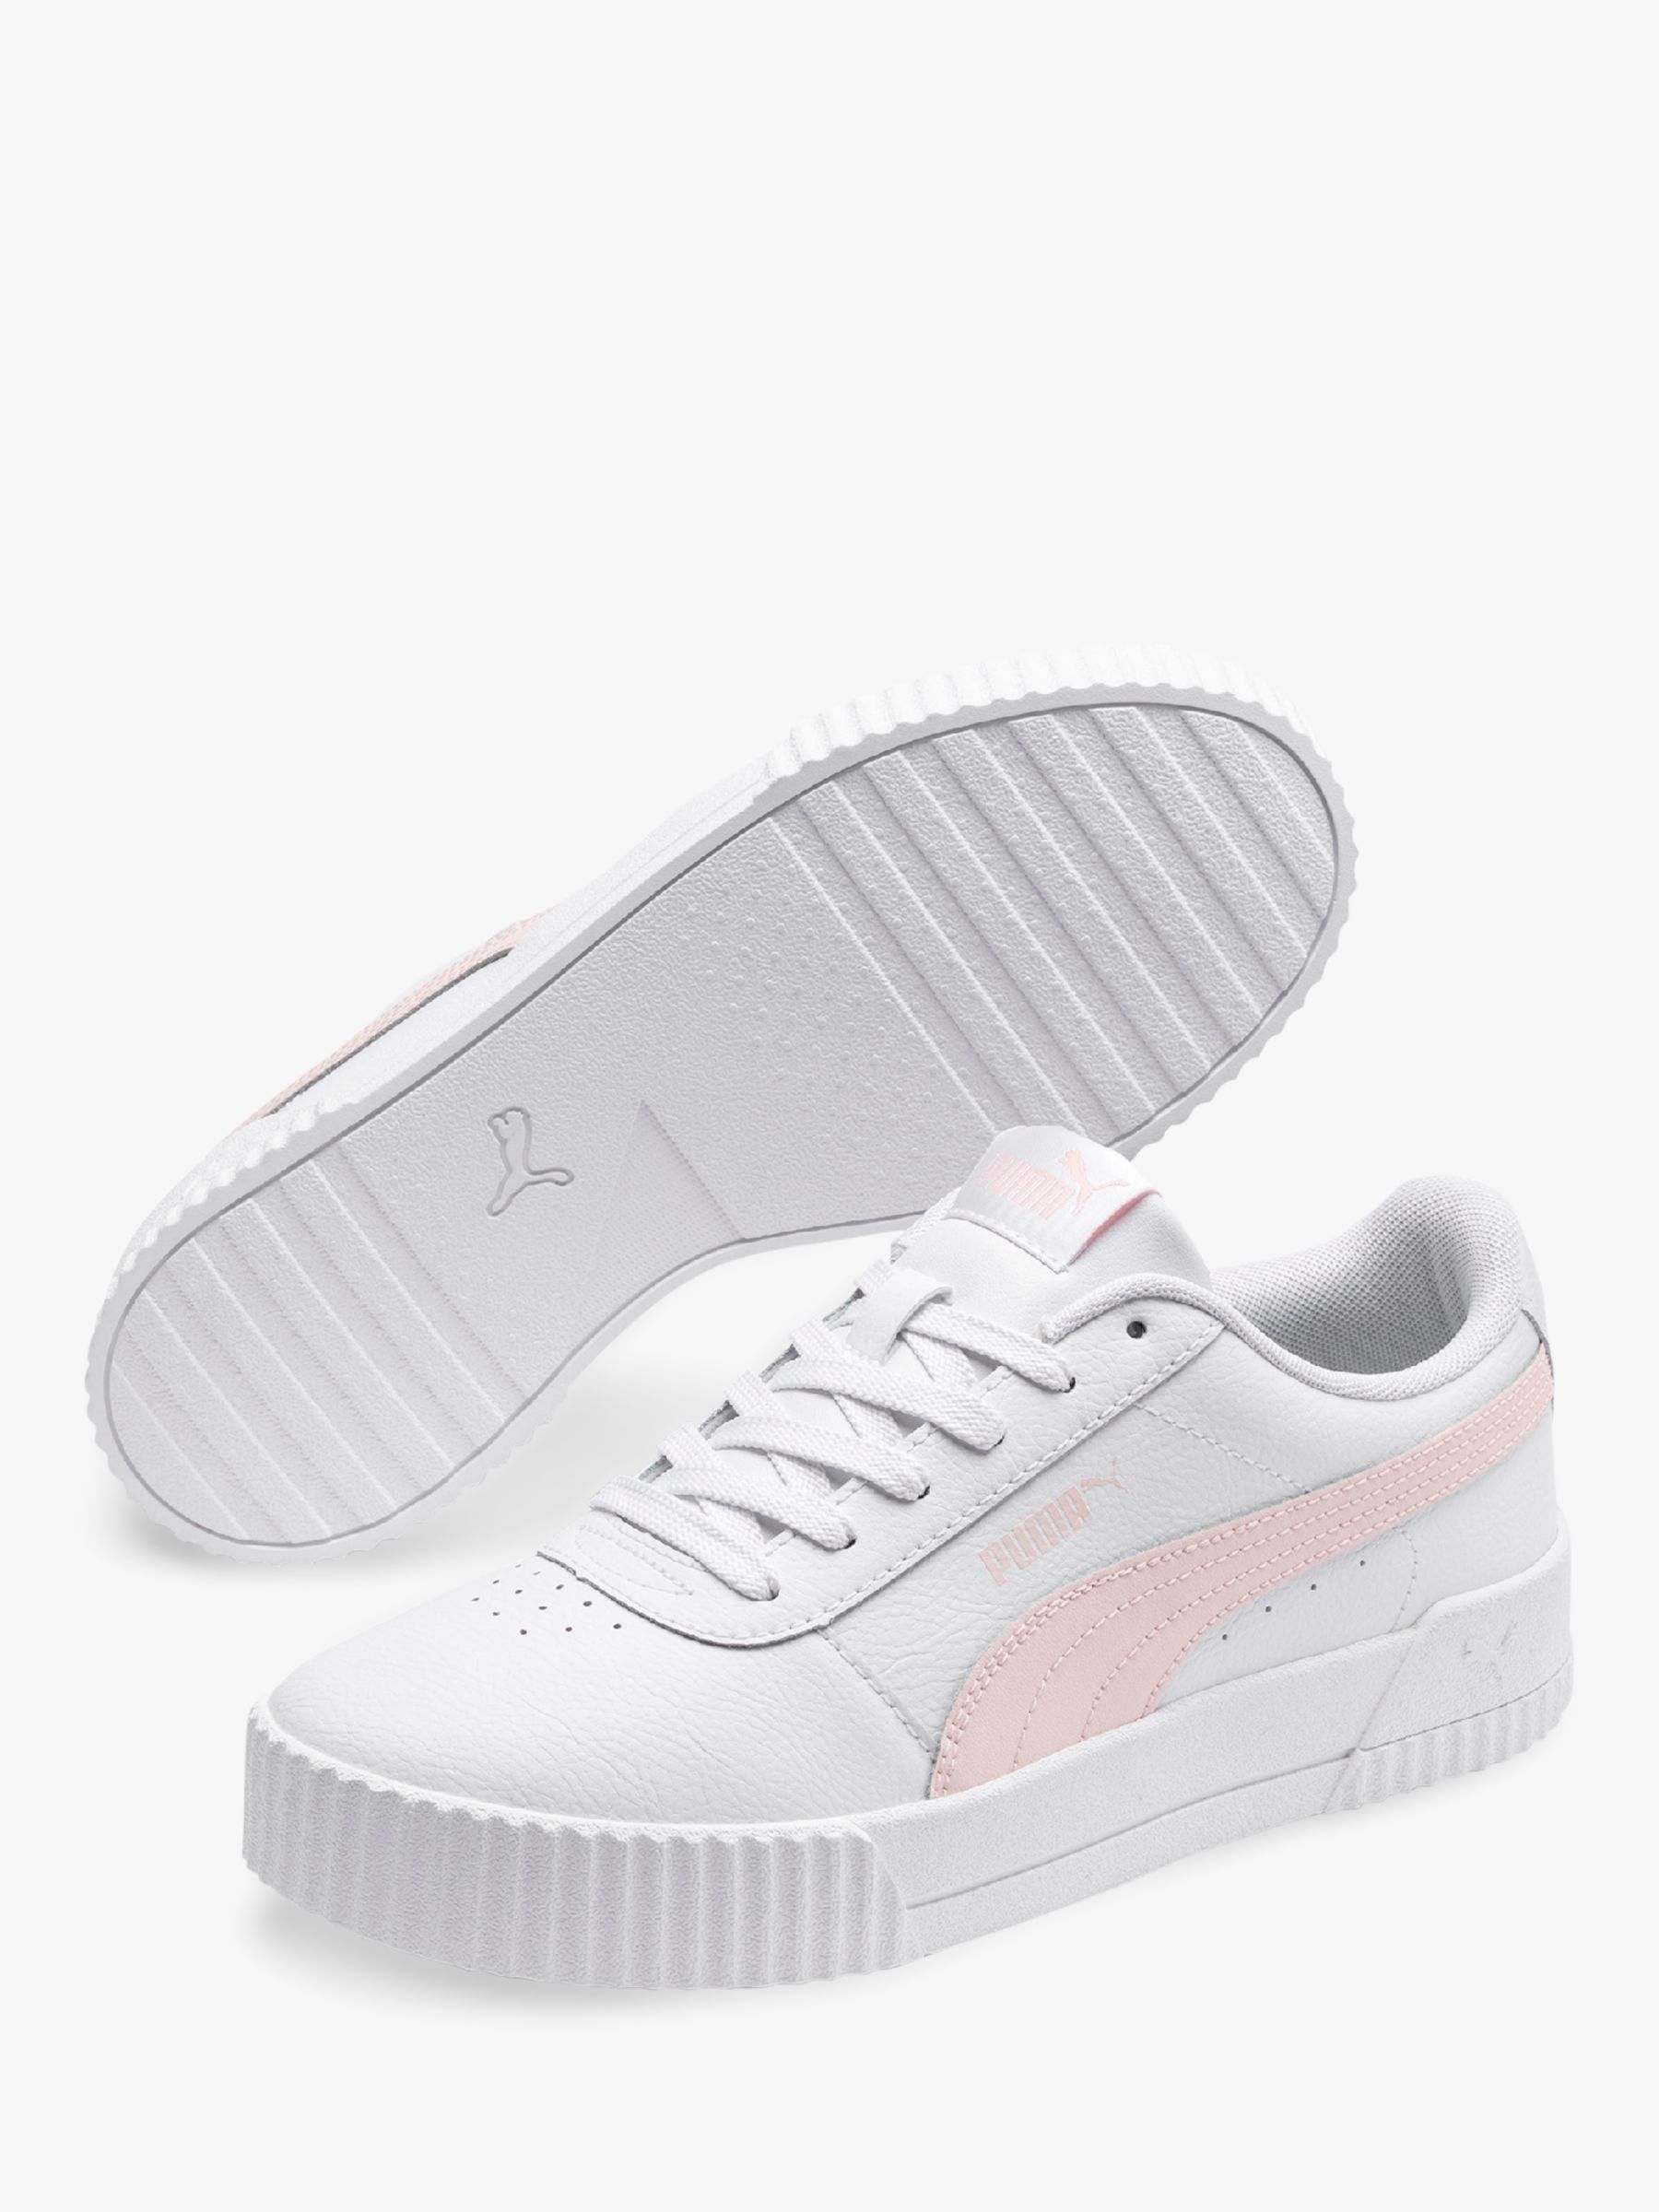 Trainers, White/Pale Pink at John Lewis 